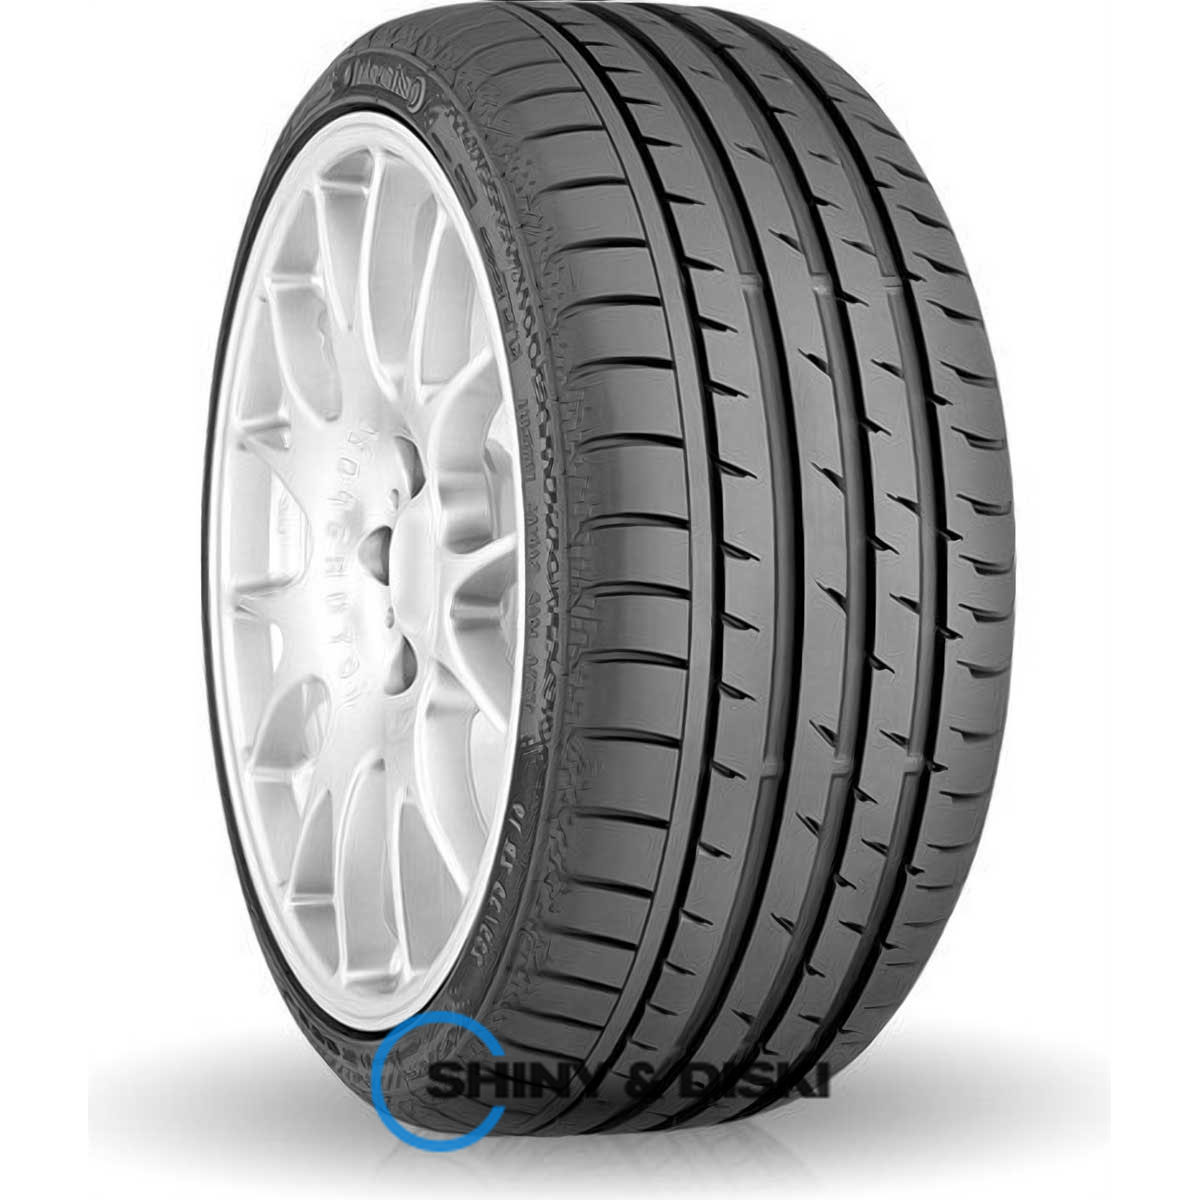 резина continental sportcontact 3 285/35 r20 99y